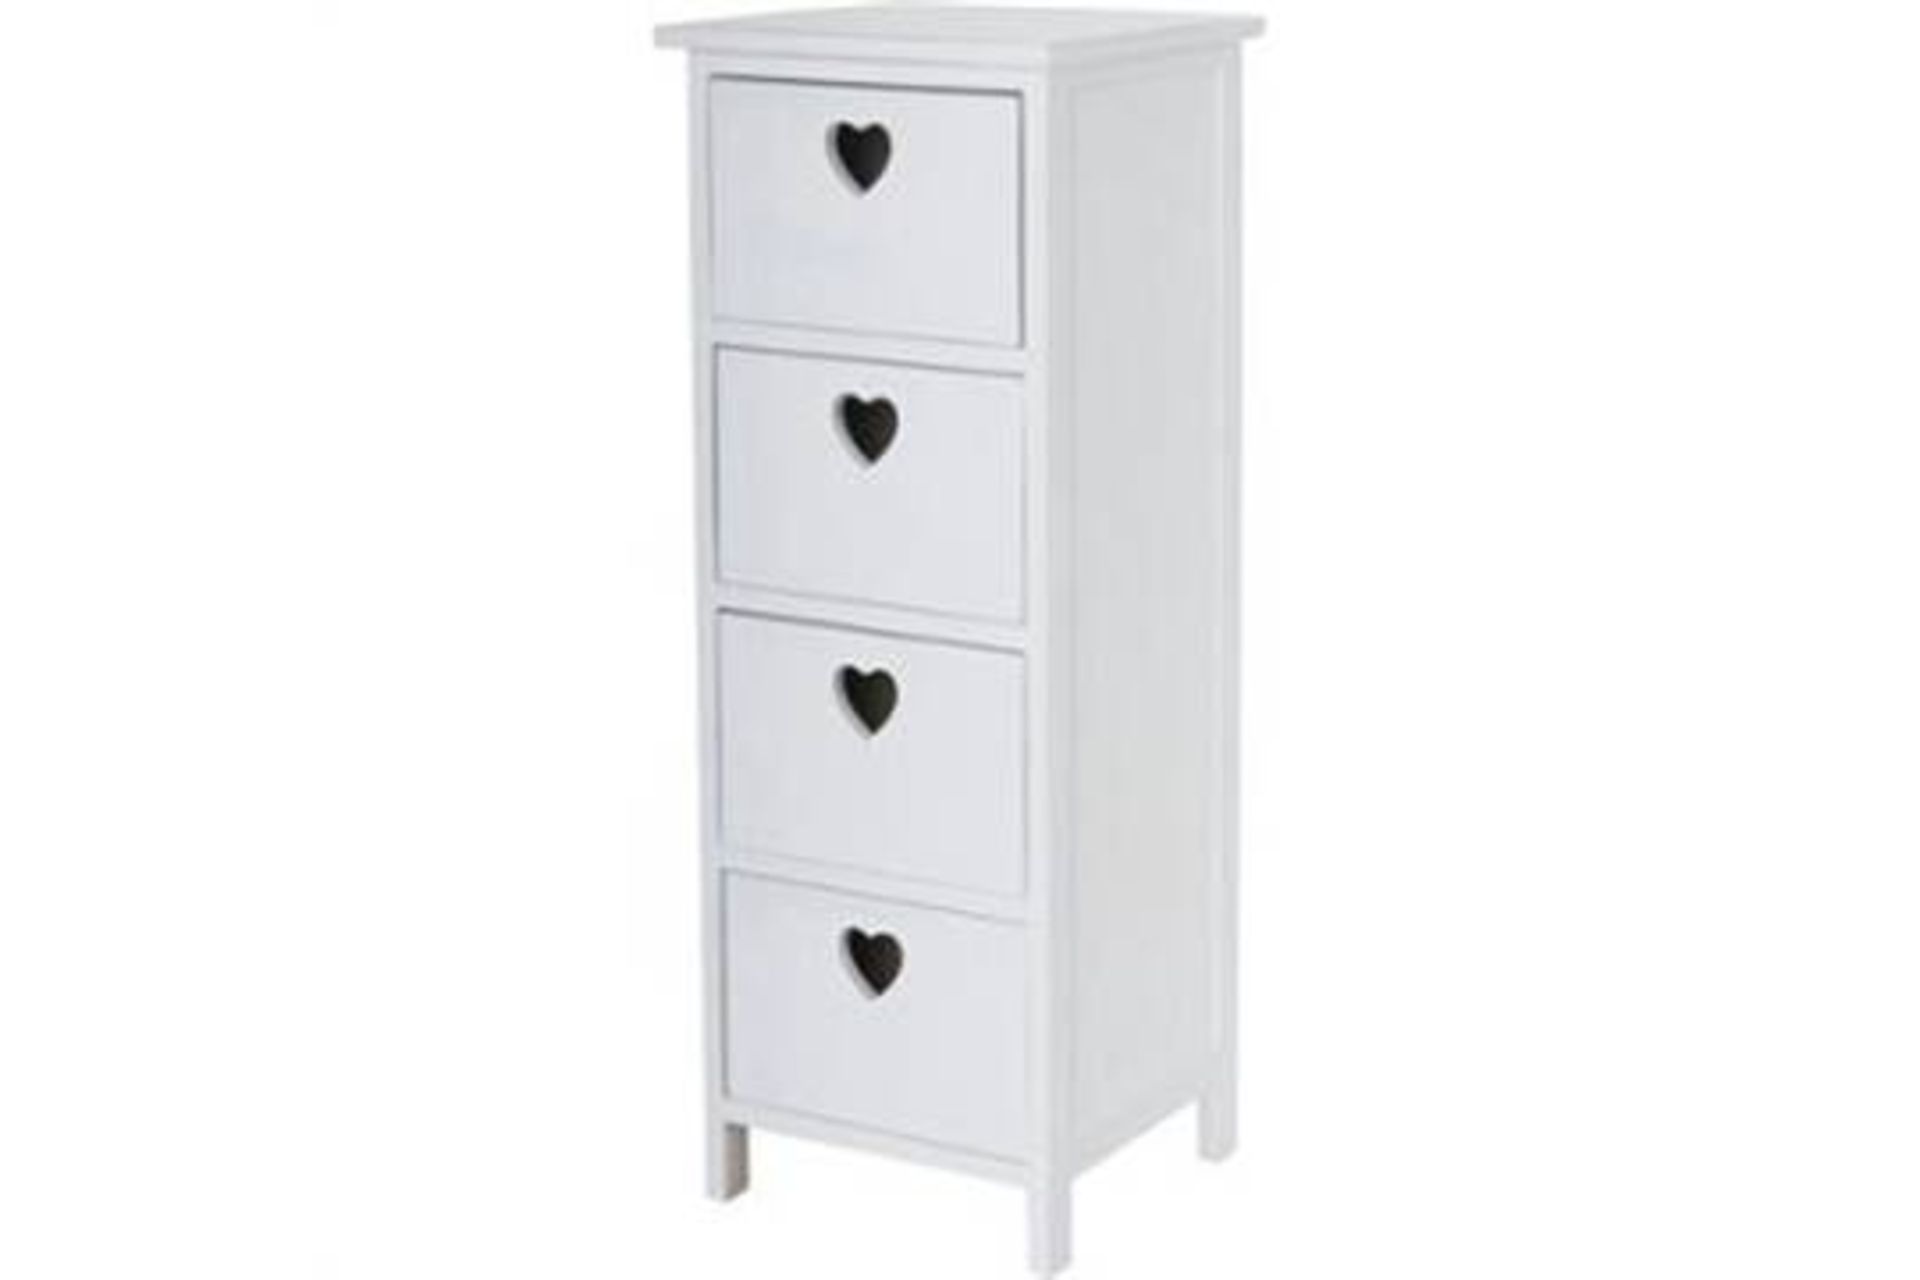 2 x White Heart Four drawer Unit. With Box. (1 x Unit Loose and need repair.) Please Note Pictures